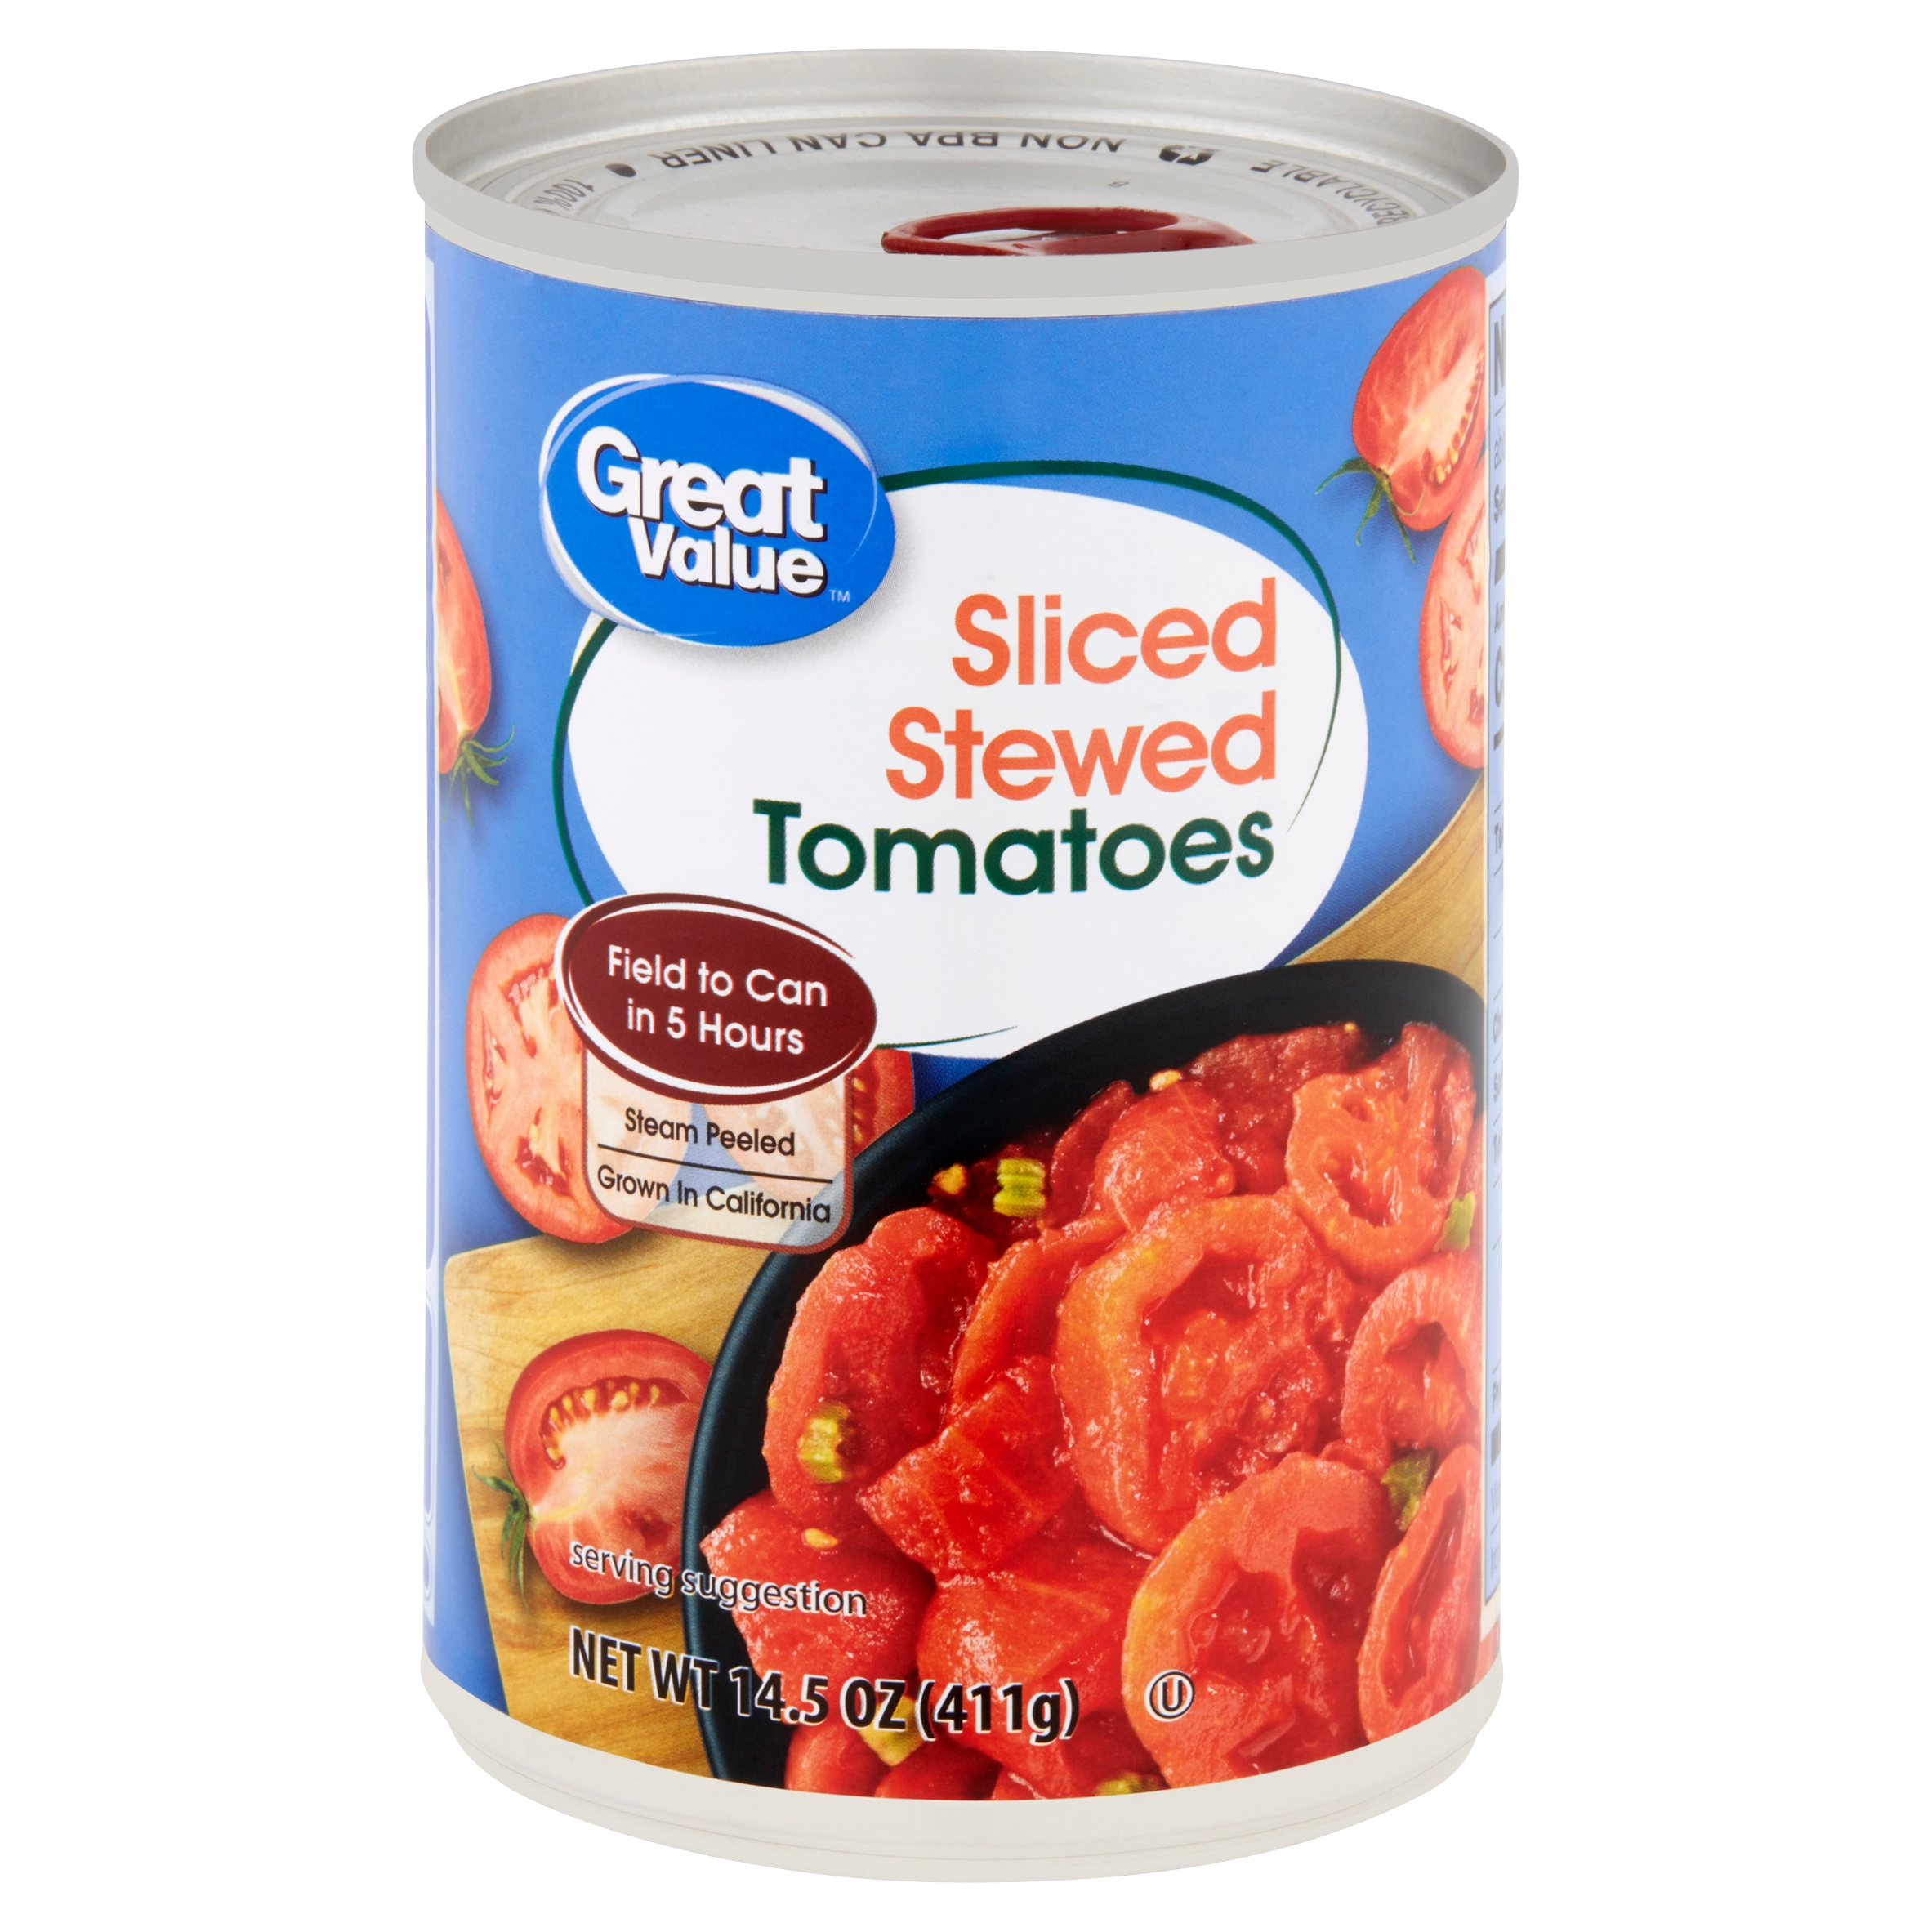 (6 Pack) Great Value Stewed Tomatoes, Sliced, 14.5 Oz Image